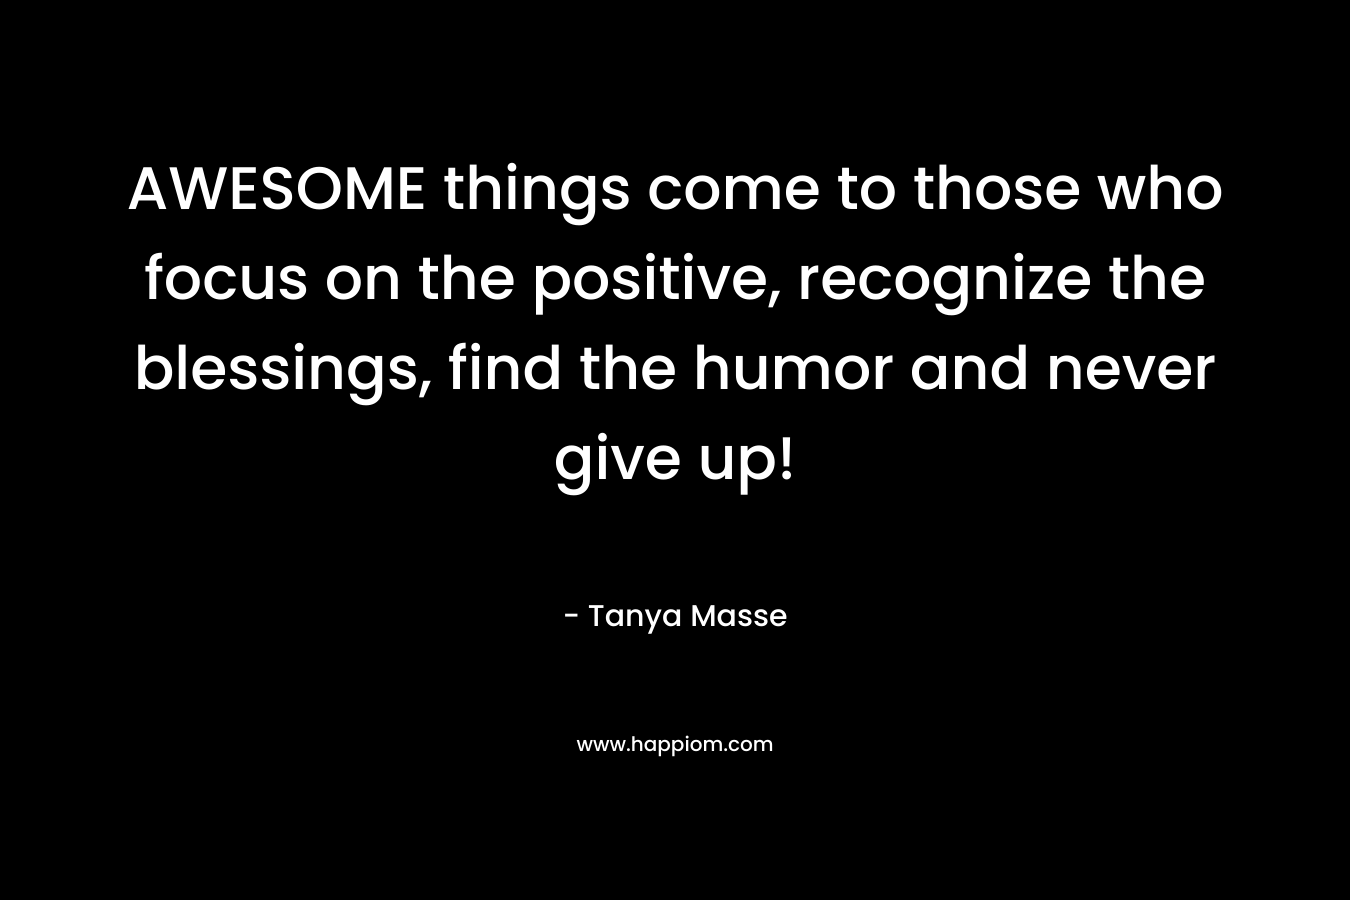 AWESOME things come to those who focus on the positive, recognize the blessings, find the humor and never give up!